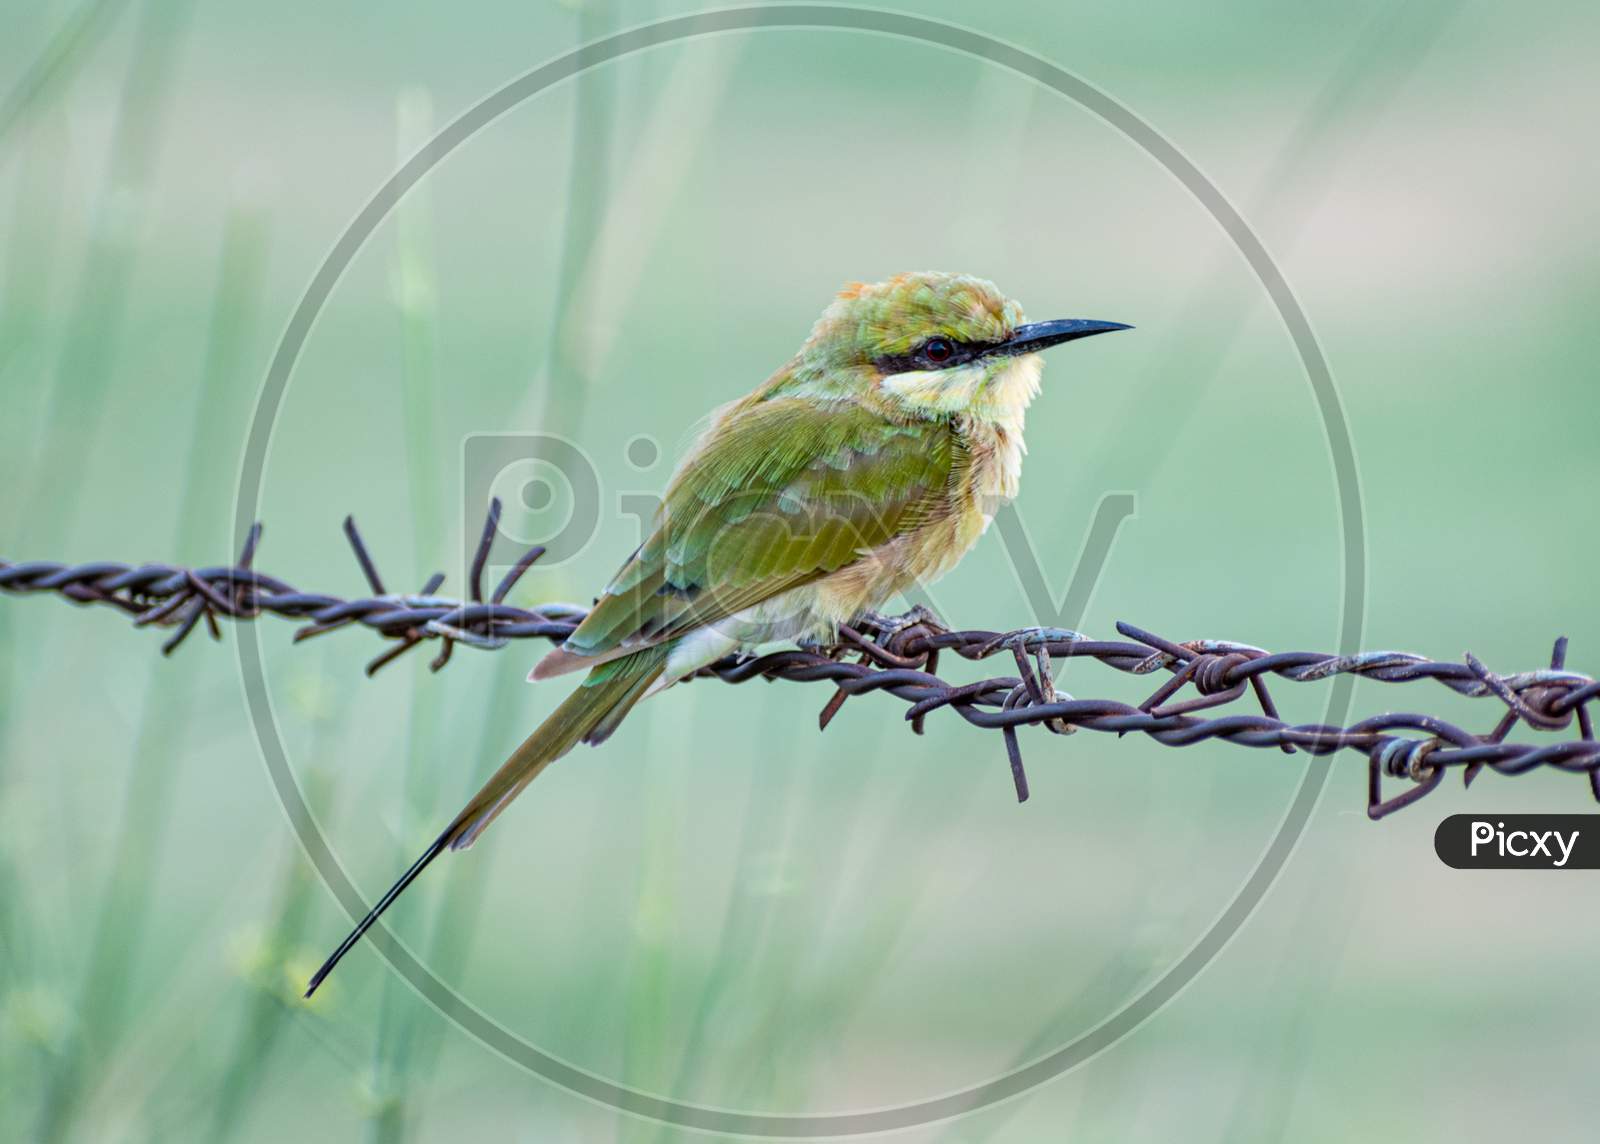 The Green-bee Eater